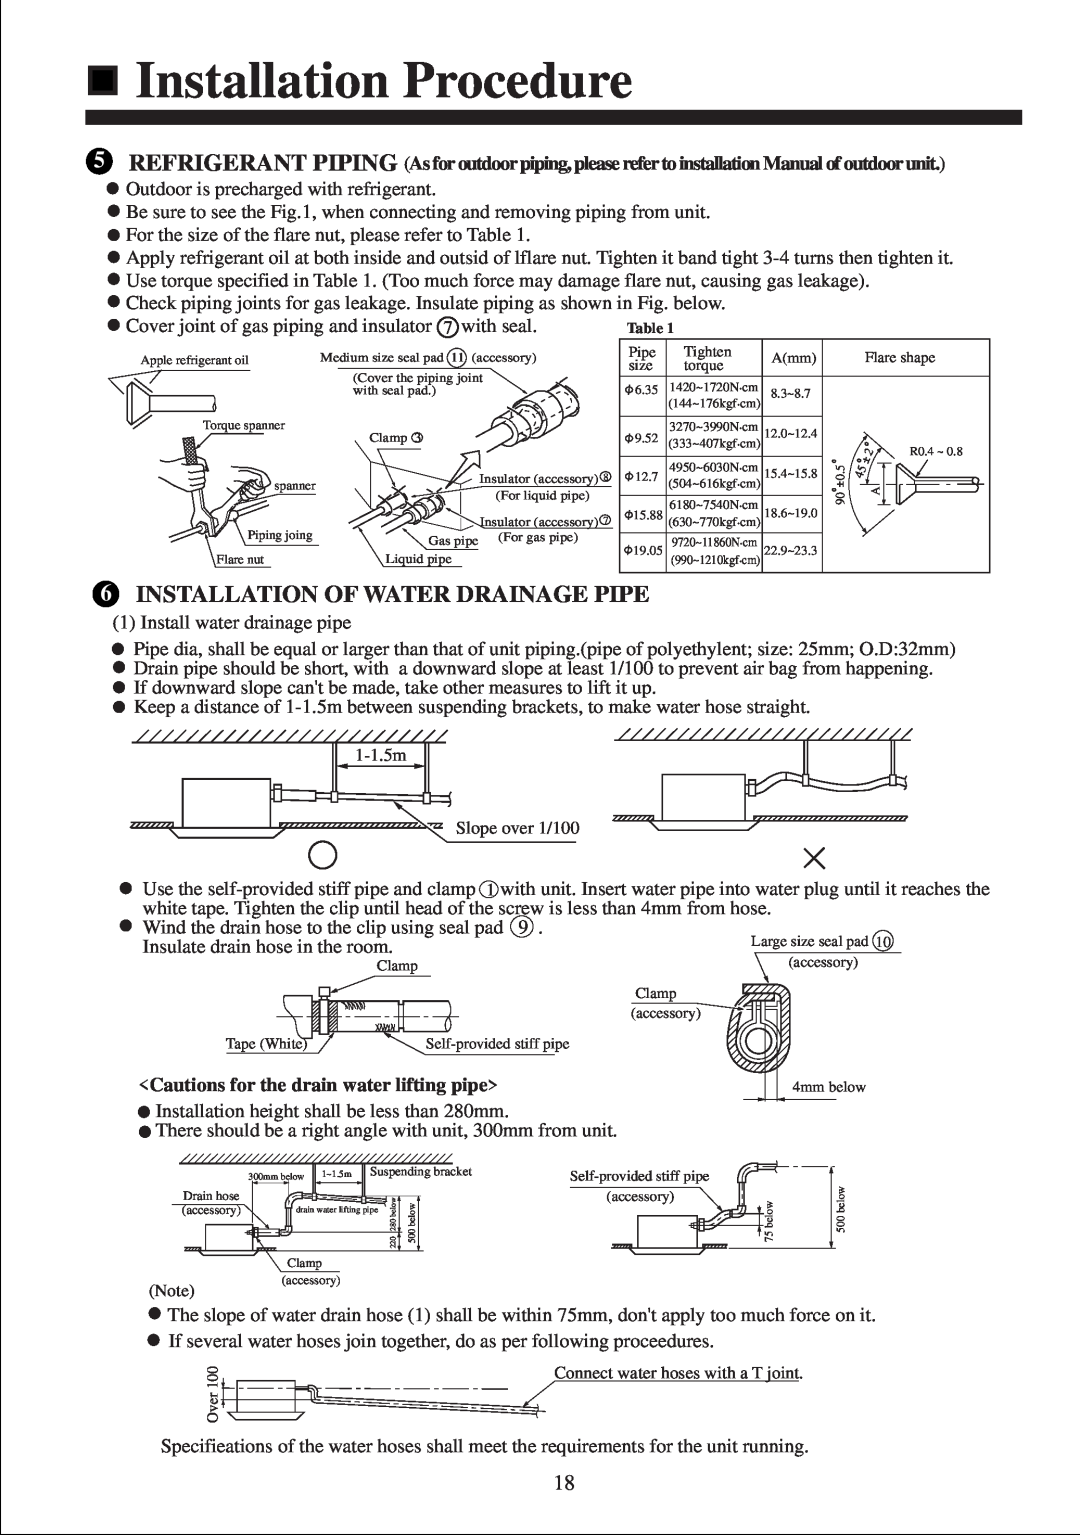 Haier AB212XCEAA Installation Procedure, Installation Of Water Drainage Pipe, Cautions for the drain water lifting pipe 